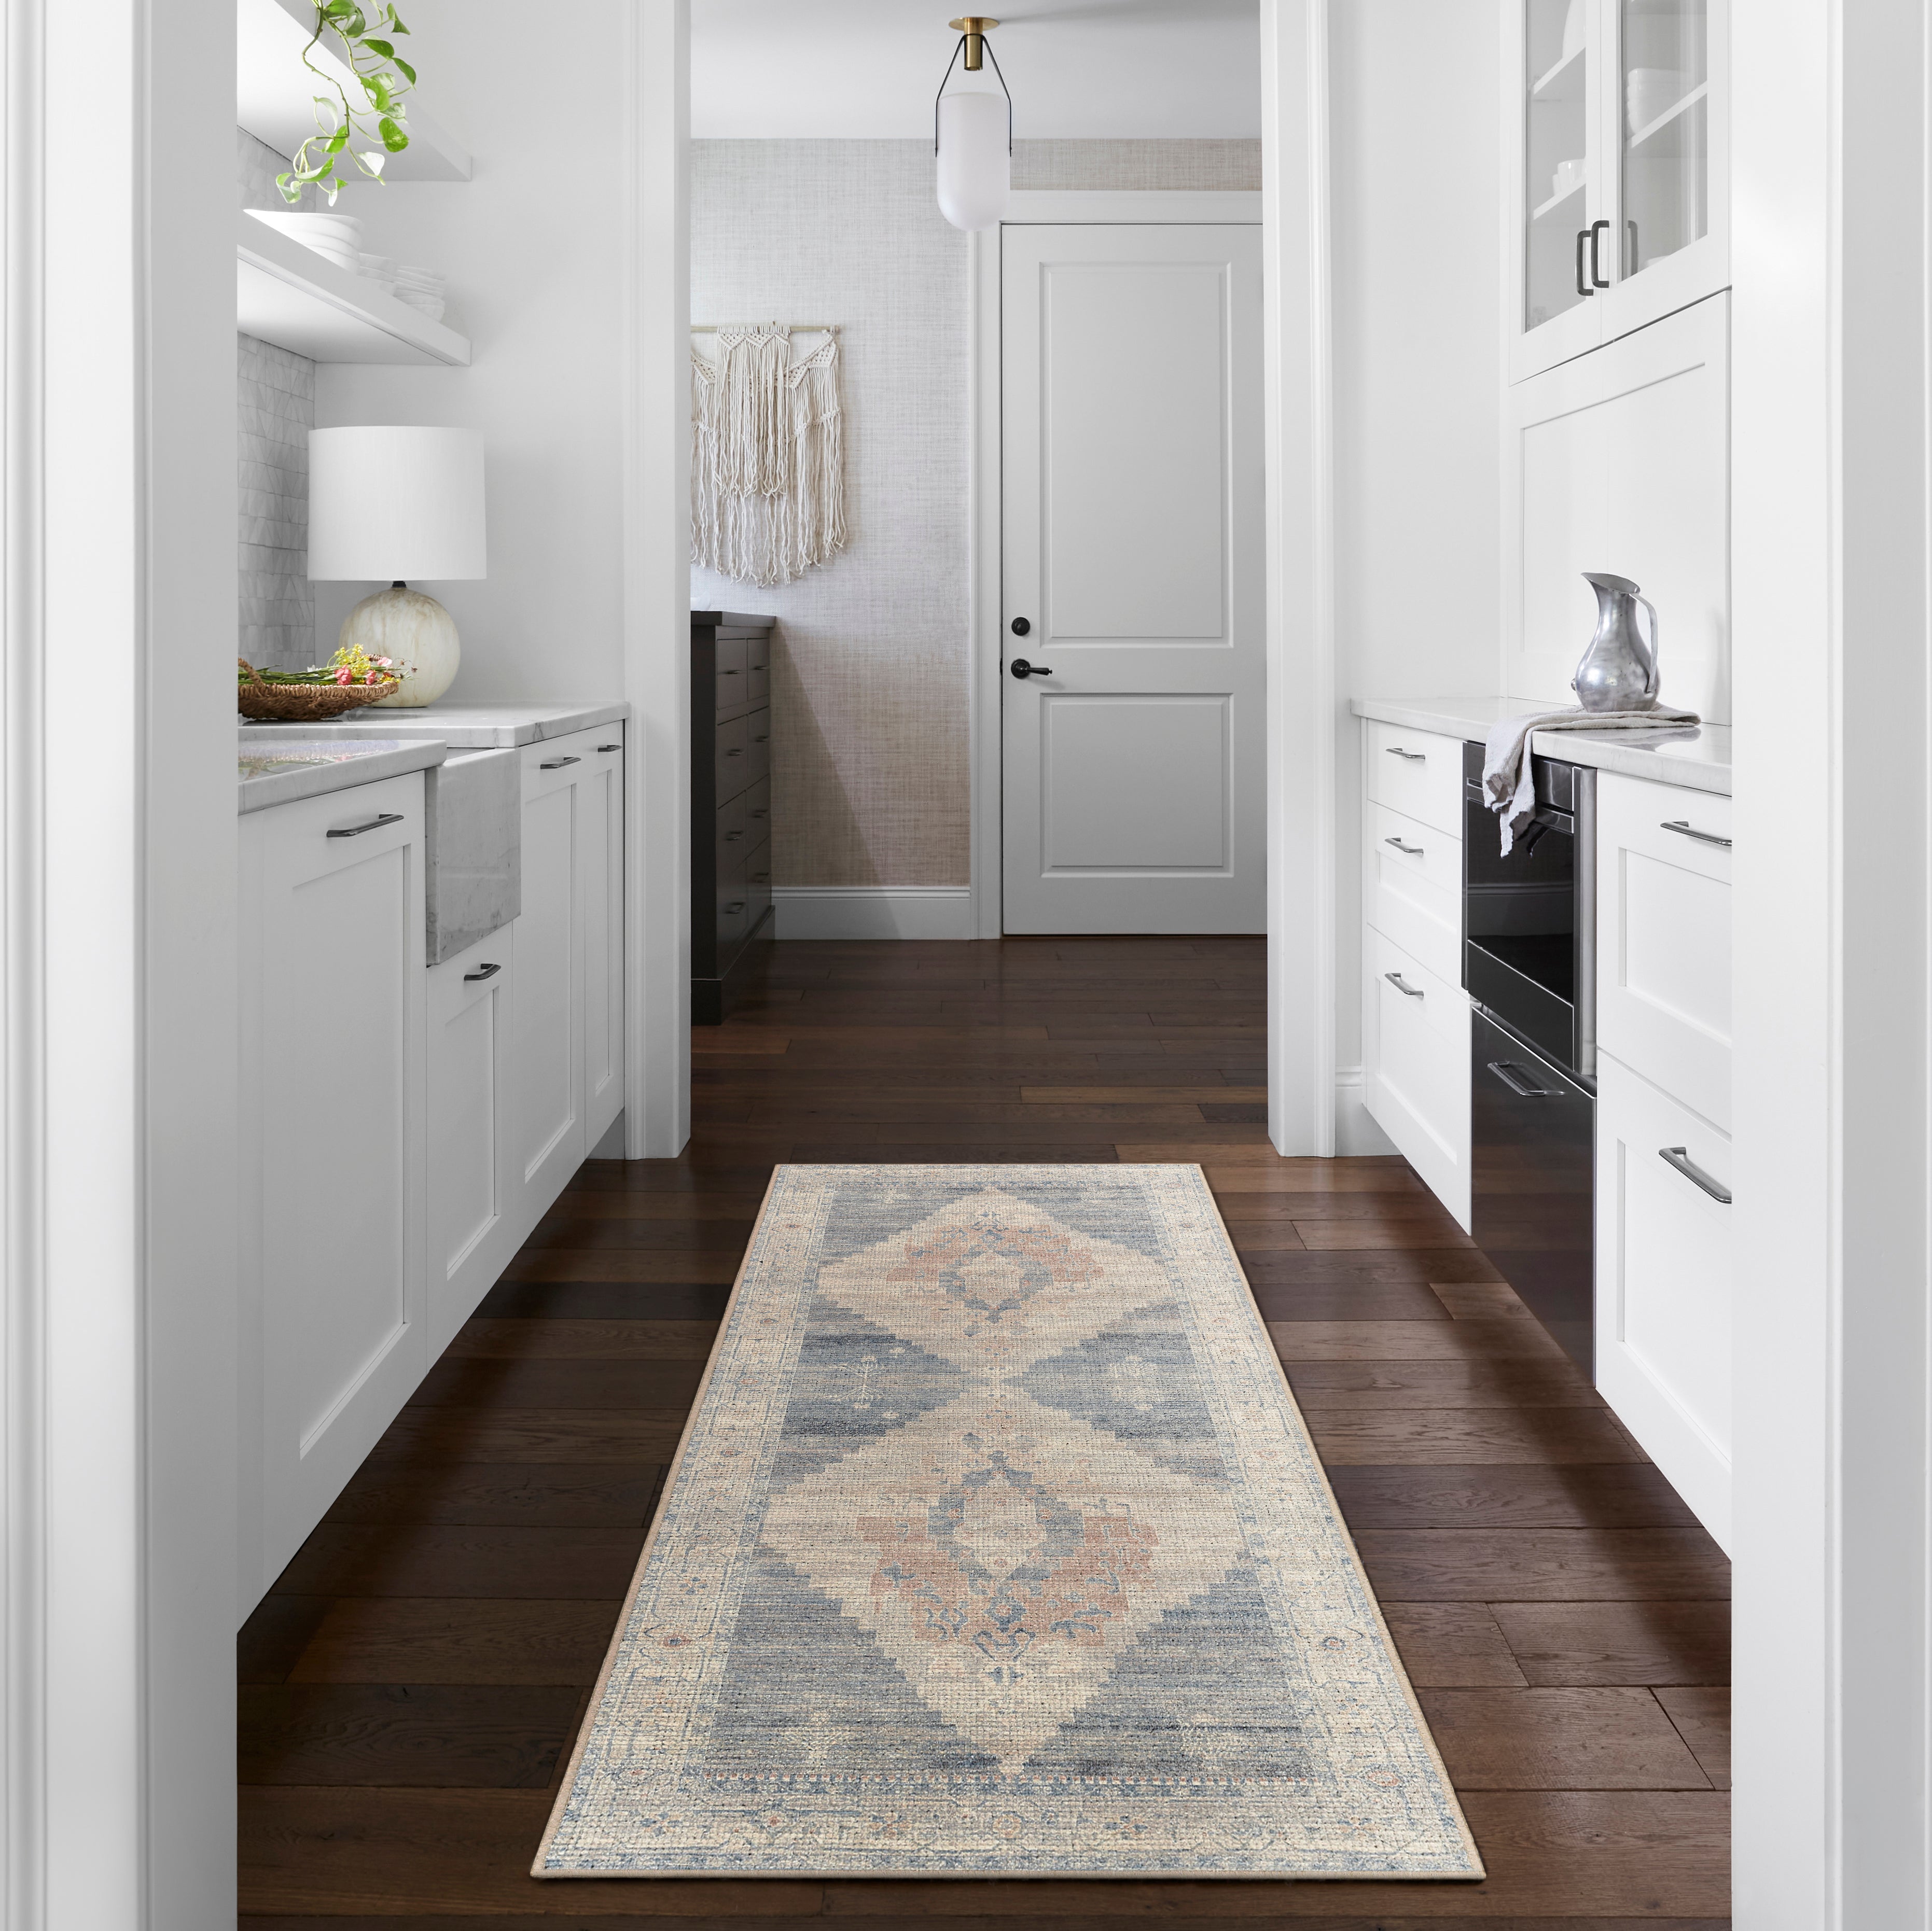 The Luca Pewter Medallion Rug from Becki Owens x Surya is a vintage inspired collection full of rich design and subtle versatile colors that will bring a curated and collected feel to any room. Amethyst Home provides interior design, new construction, custom furniture, and area rugs in the Omaha metro area.